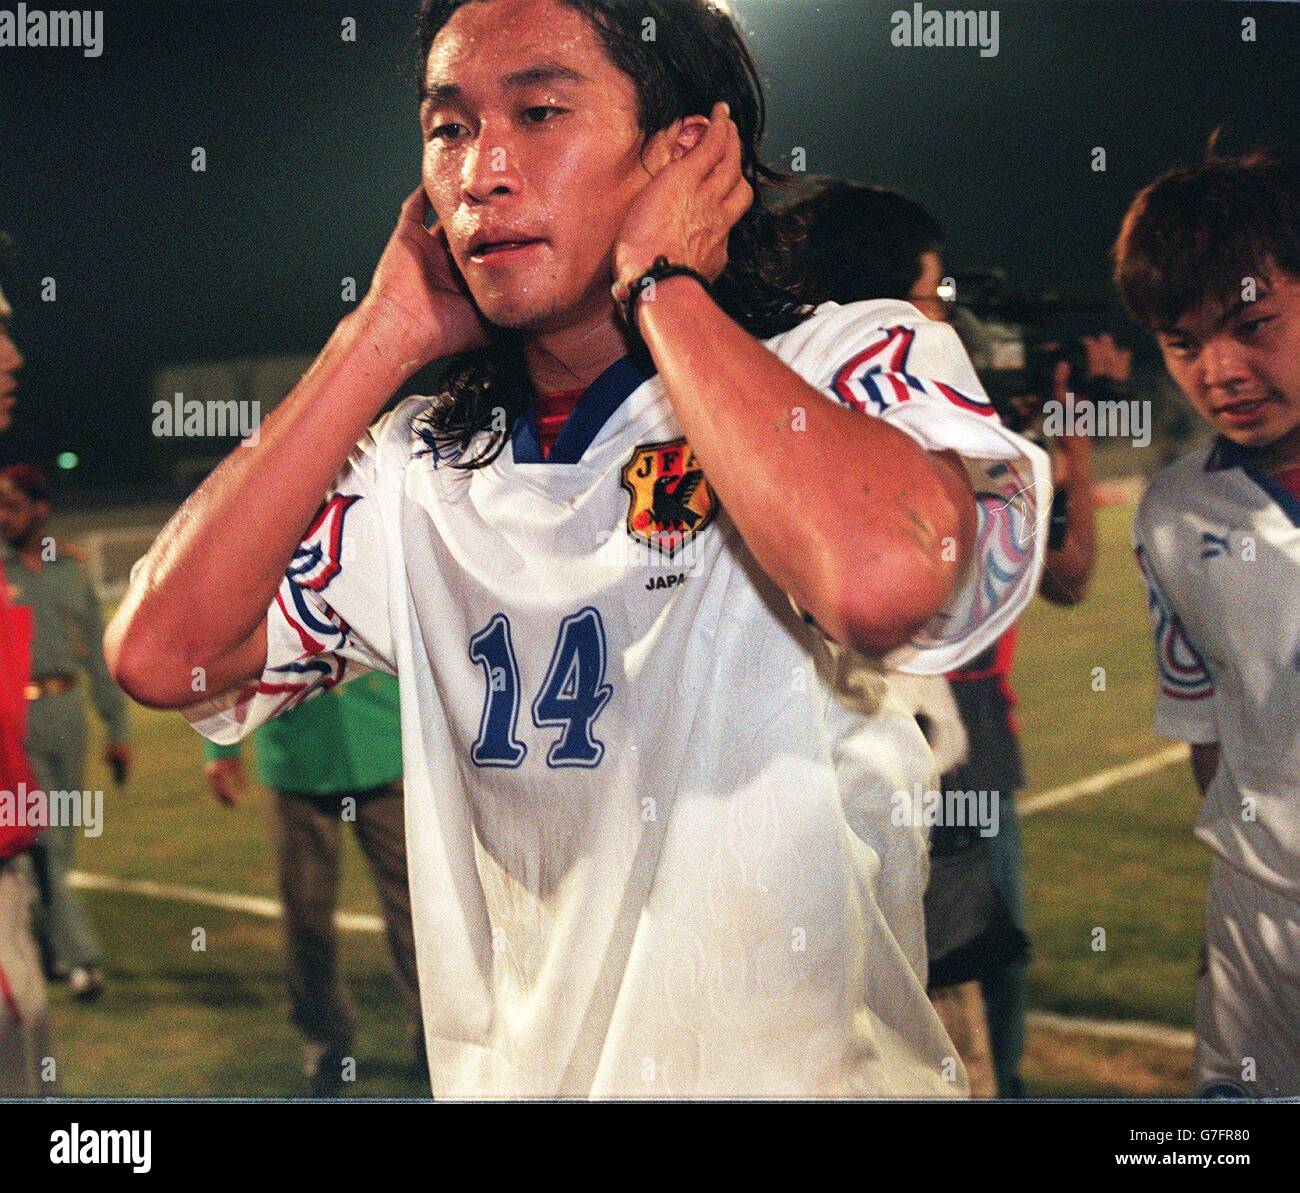 Japan's Masayuki Okano leaves the field after losing to Kuwait and being knocked out of the tournament Stock Photo